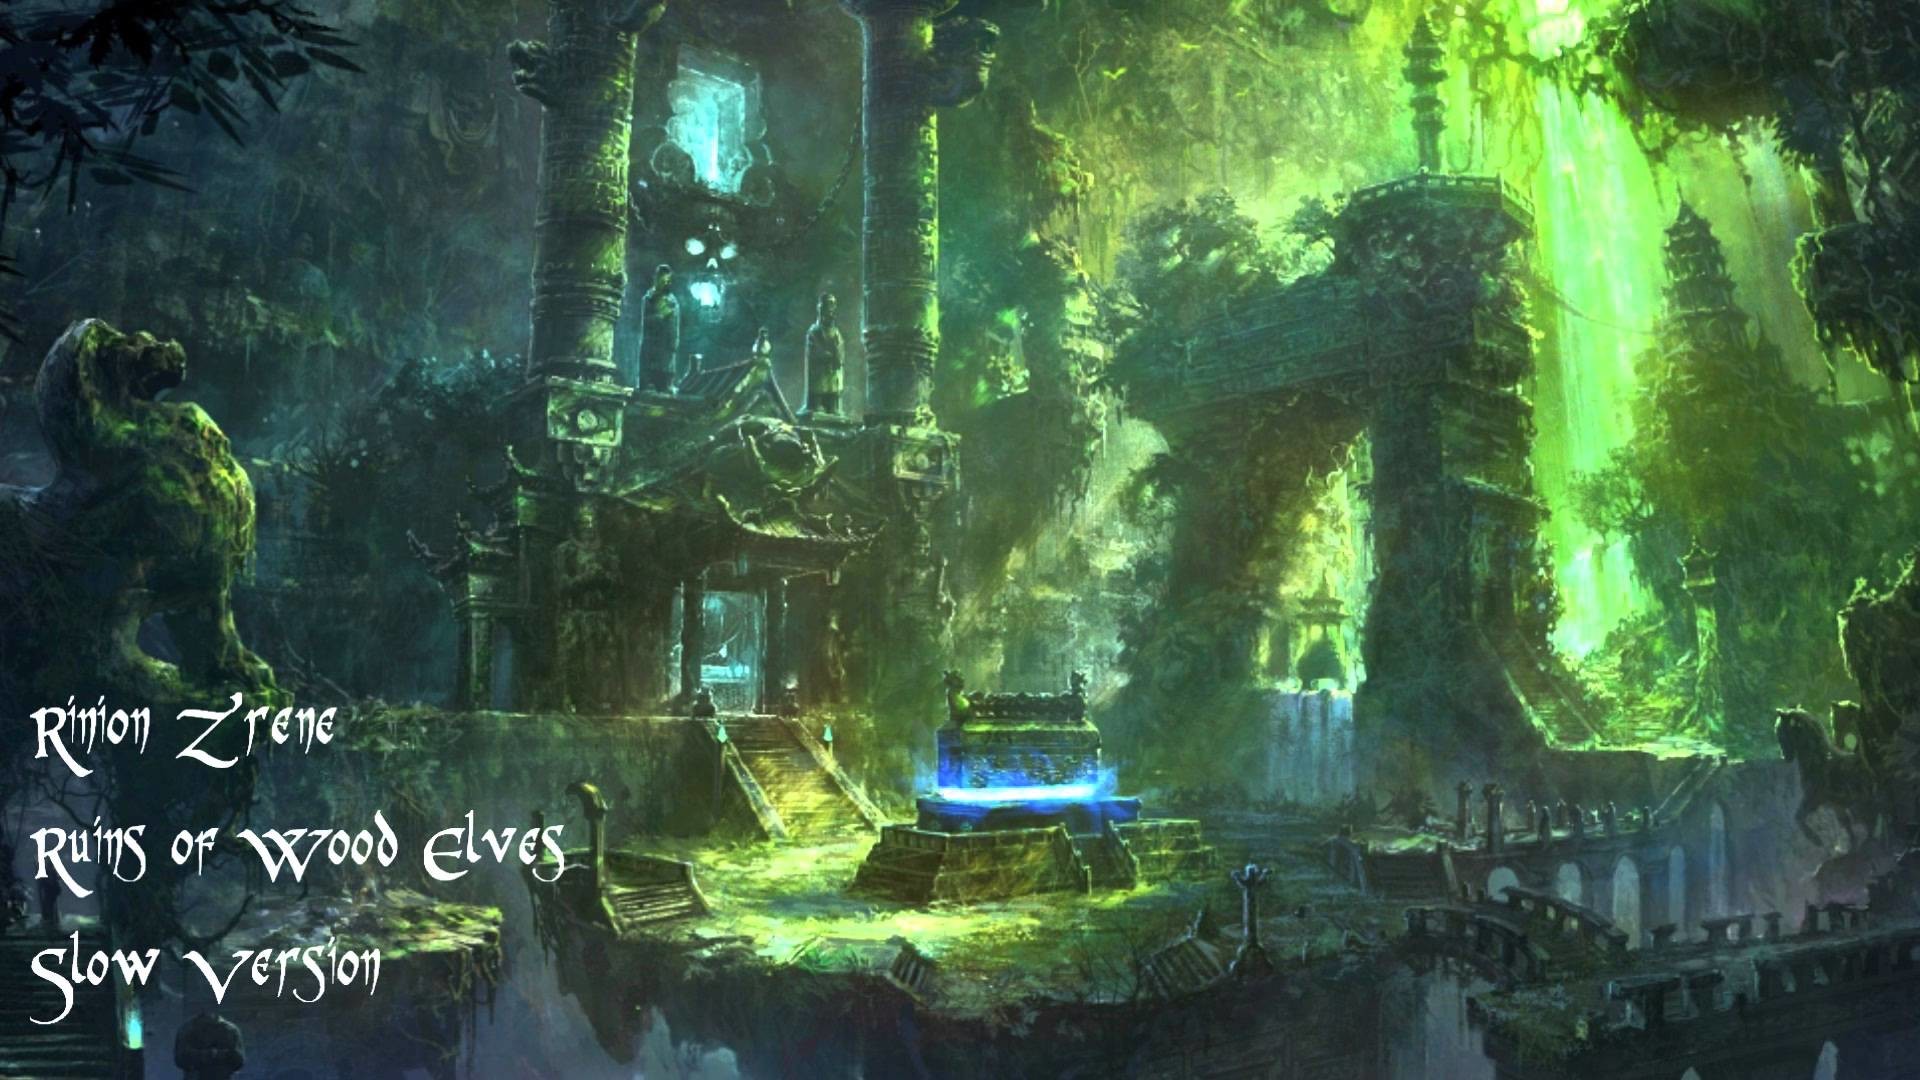 1920x1080 Forest Music: Ruins of the Wood Elves (Slow Version)